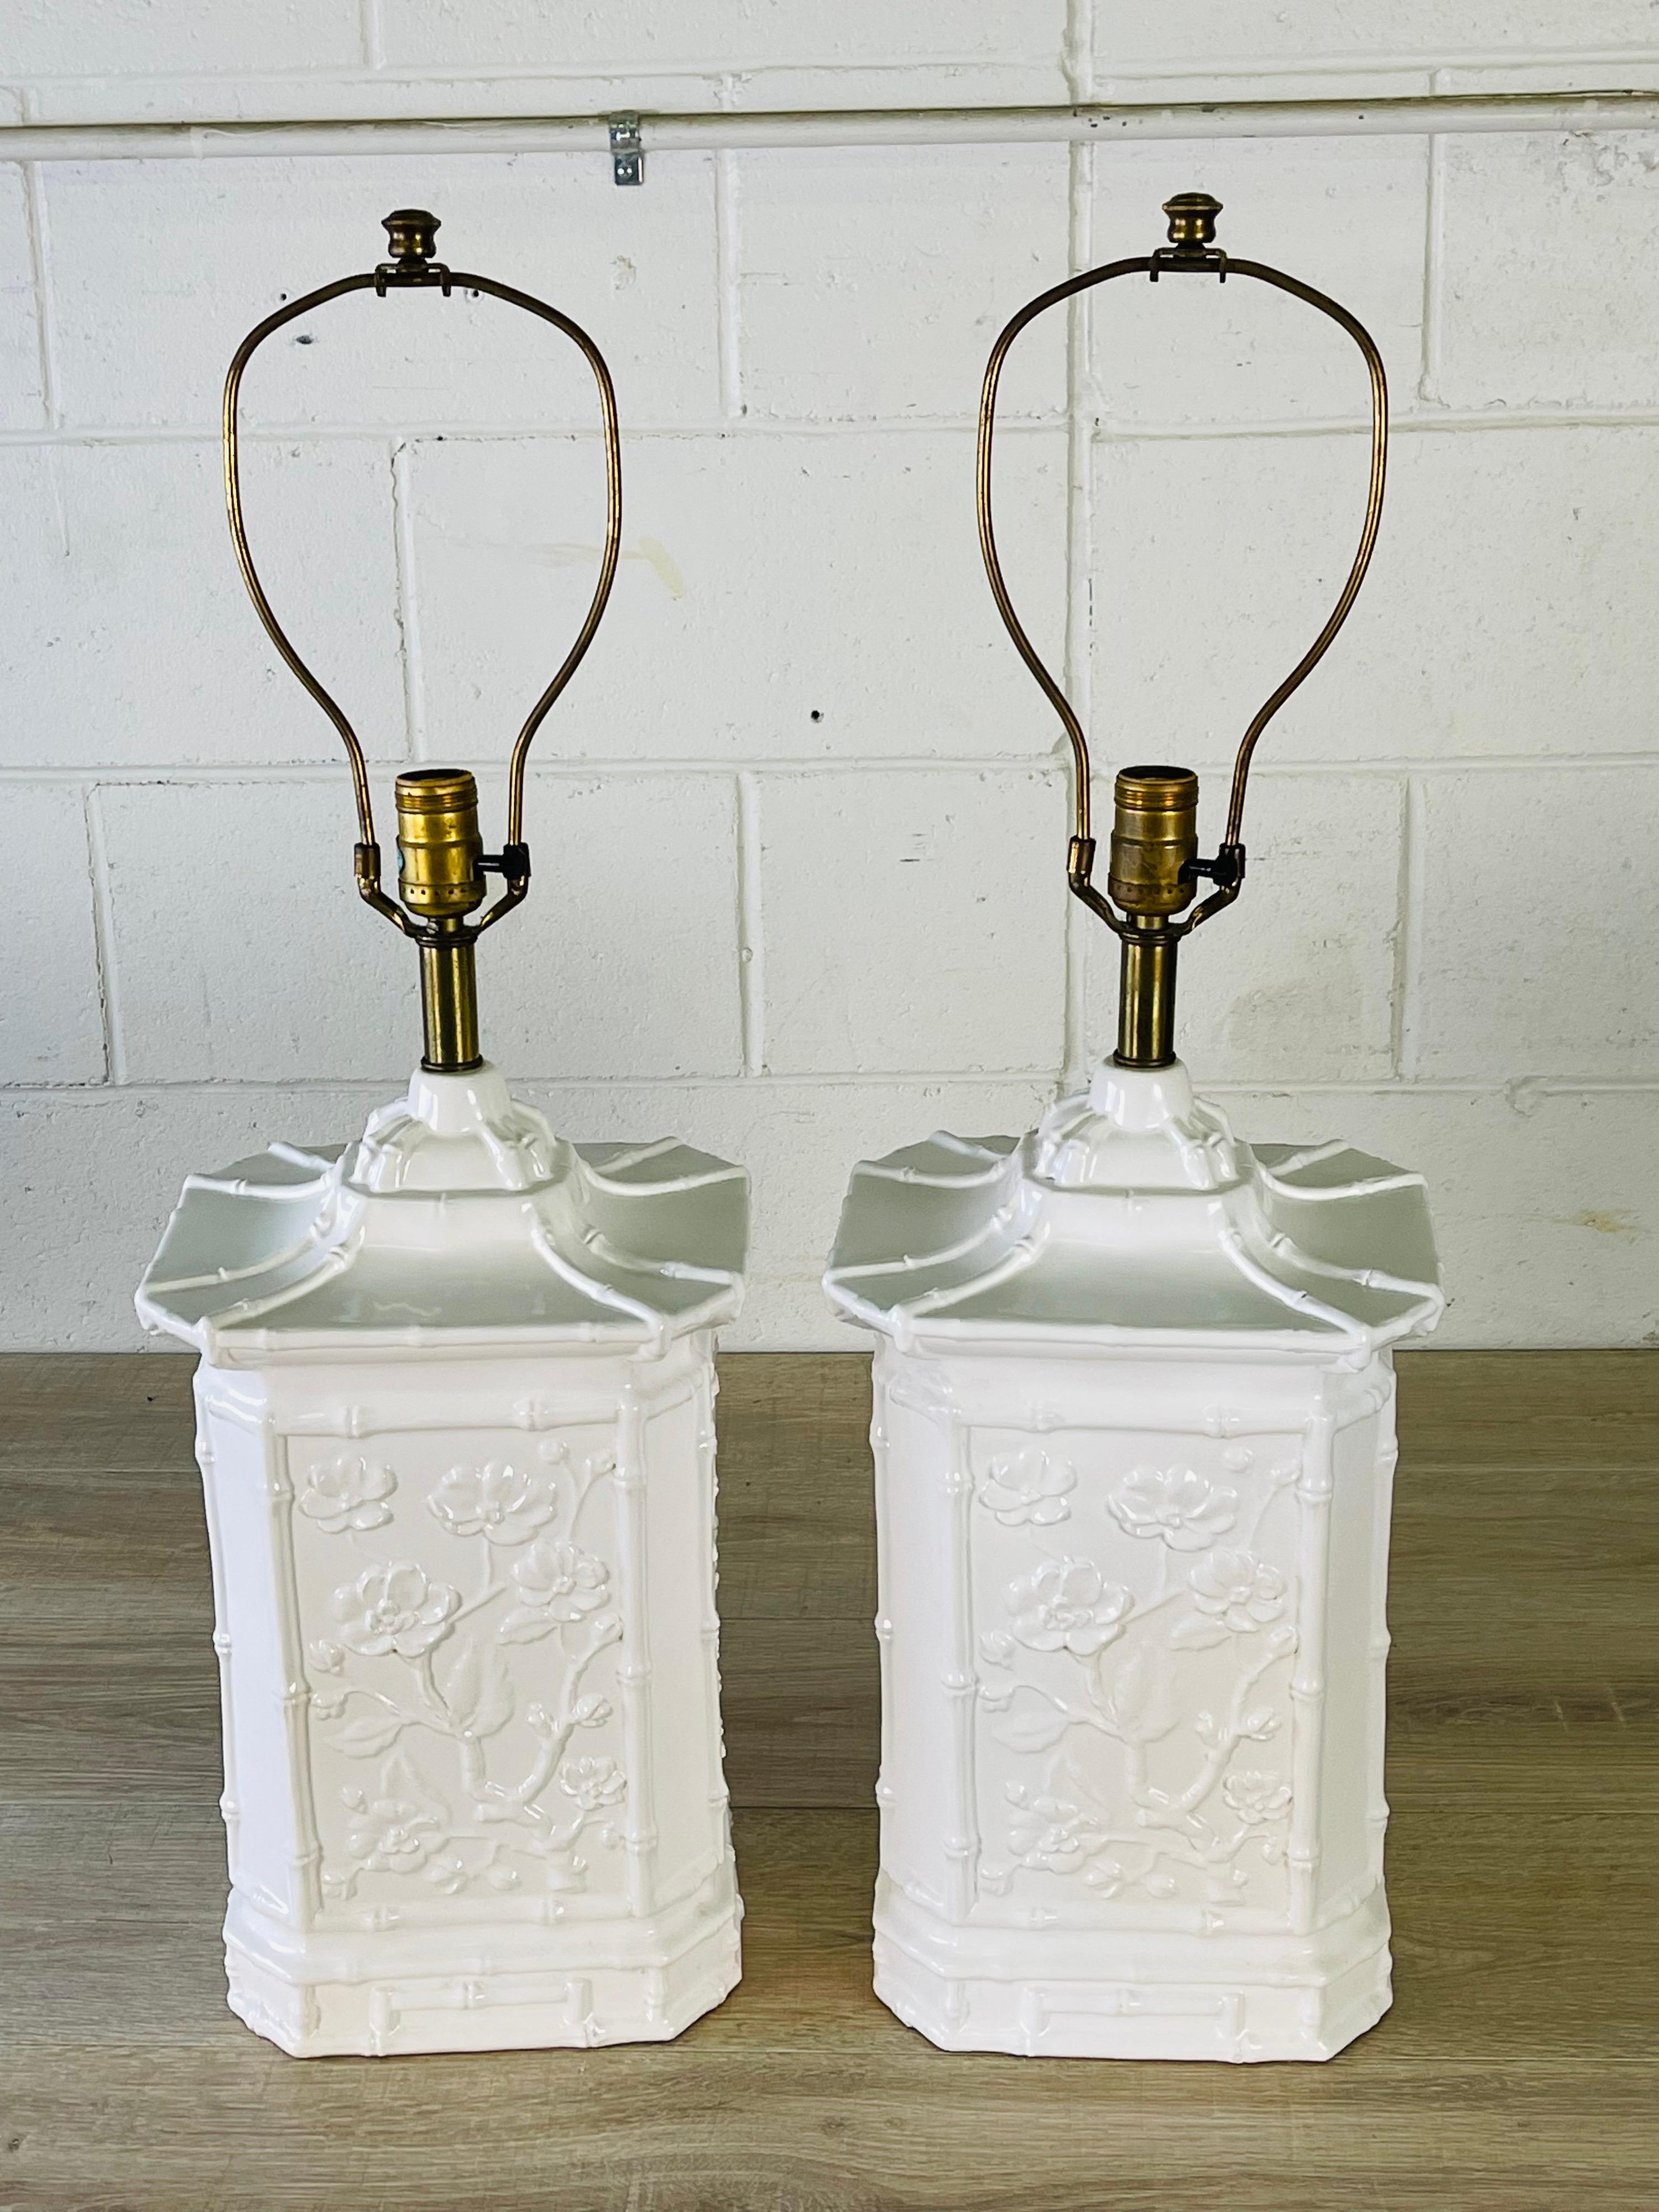 Vintage 1970s Asian style ceramic table lamps in white. The lamps have a floral and bamboo design on all sides of the lamps. Wired for the US and in working condition. Uses a standard 3-way bulb. Socket, 20.5” height. Harp, 6” diameter x 9” height.